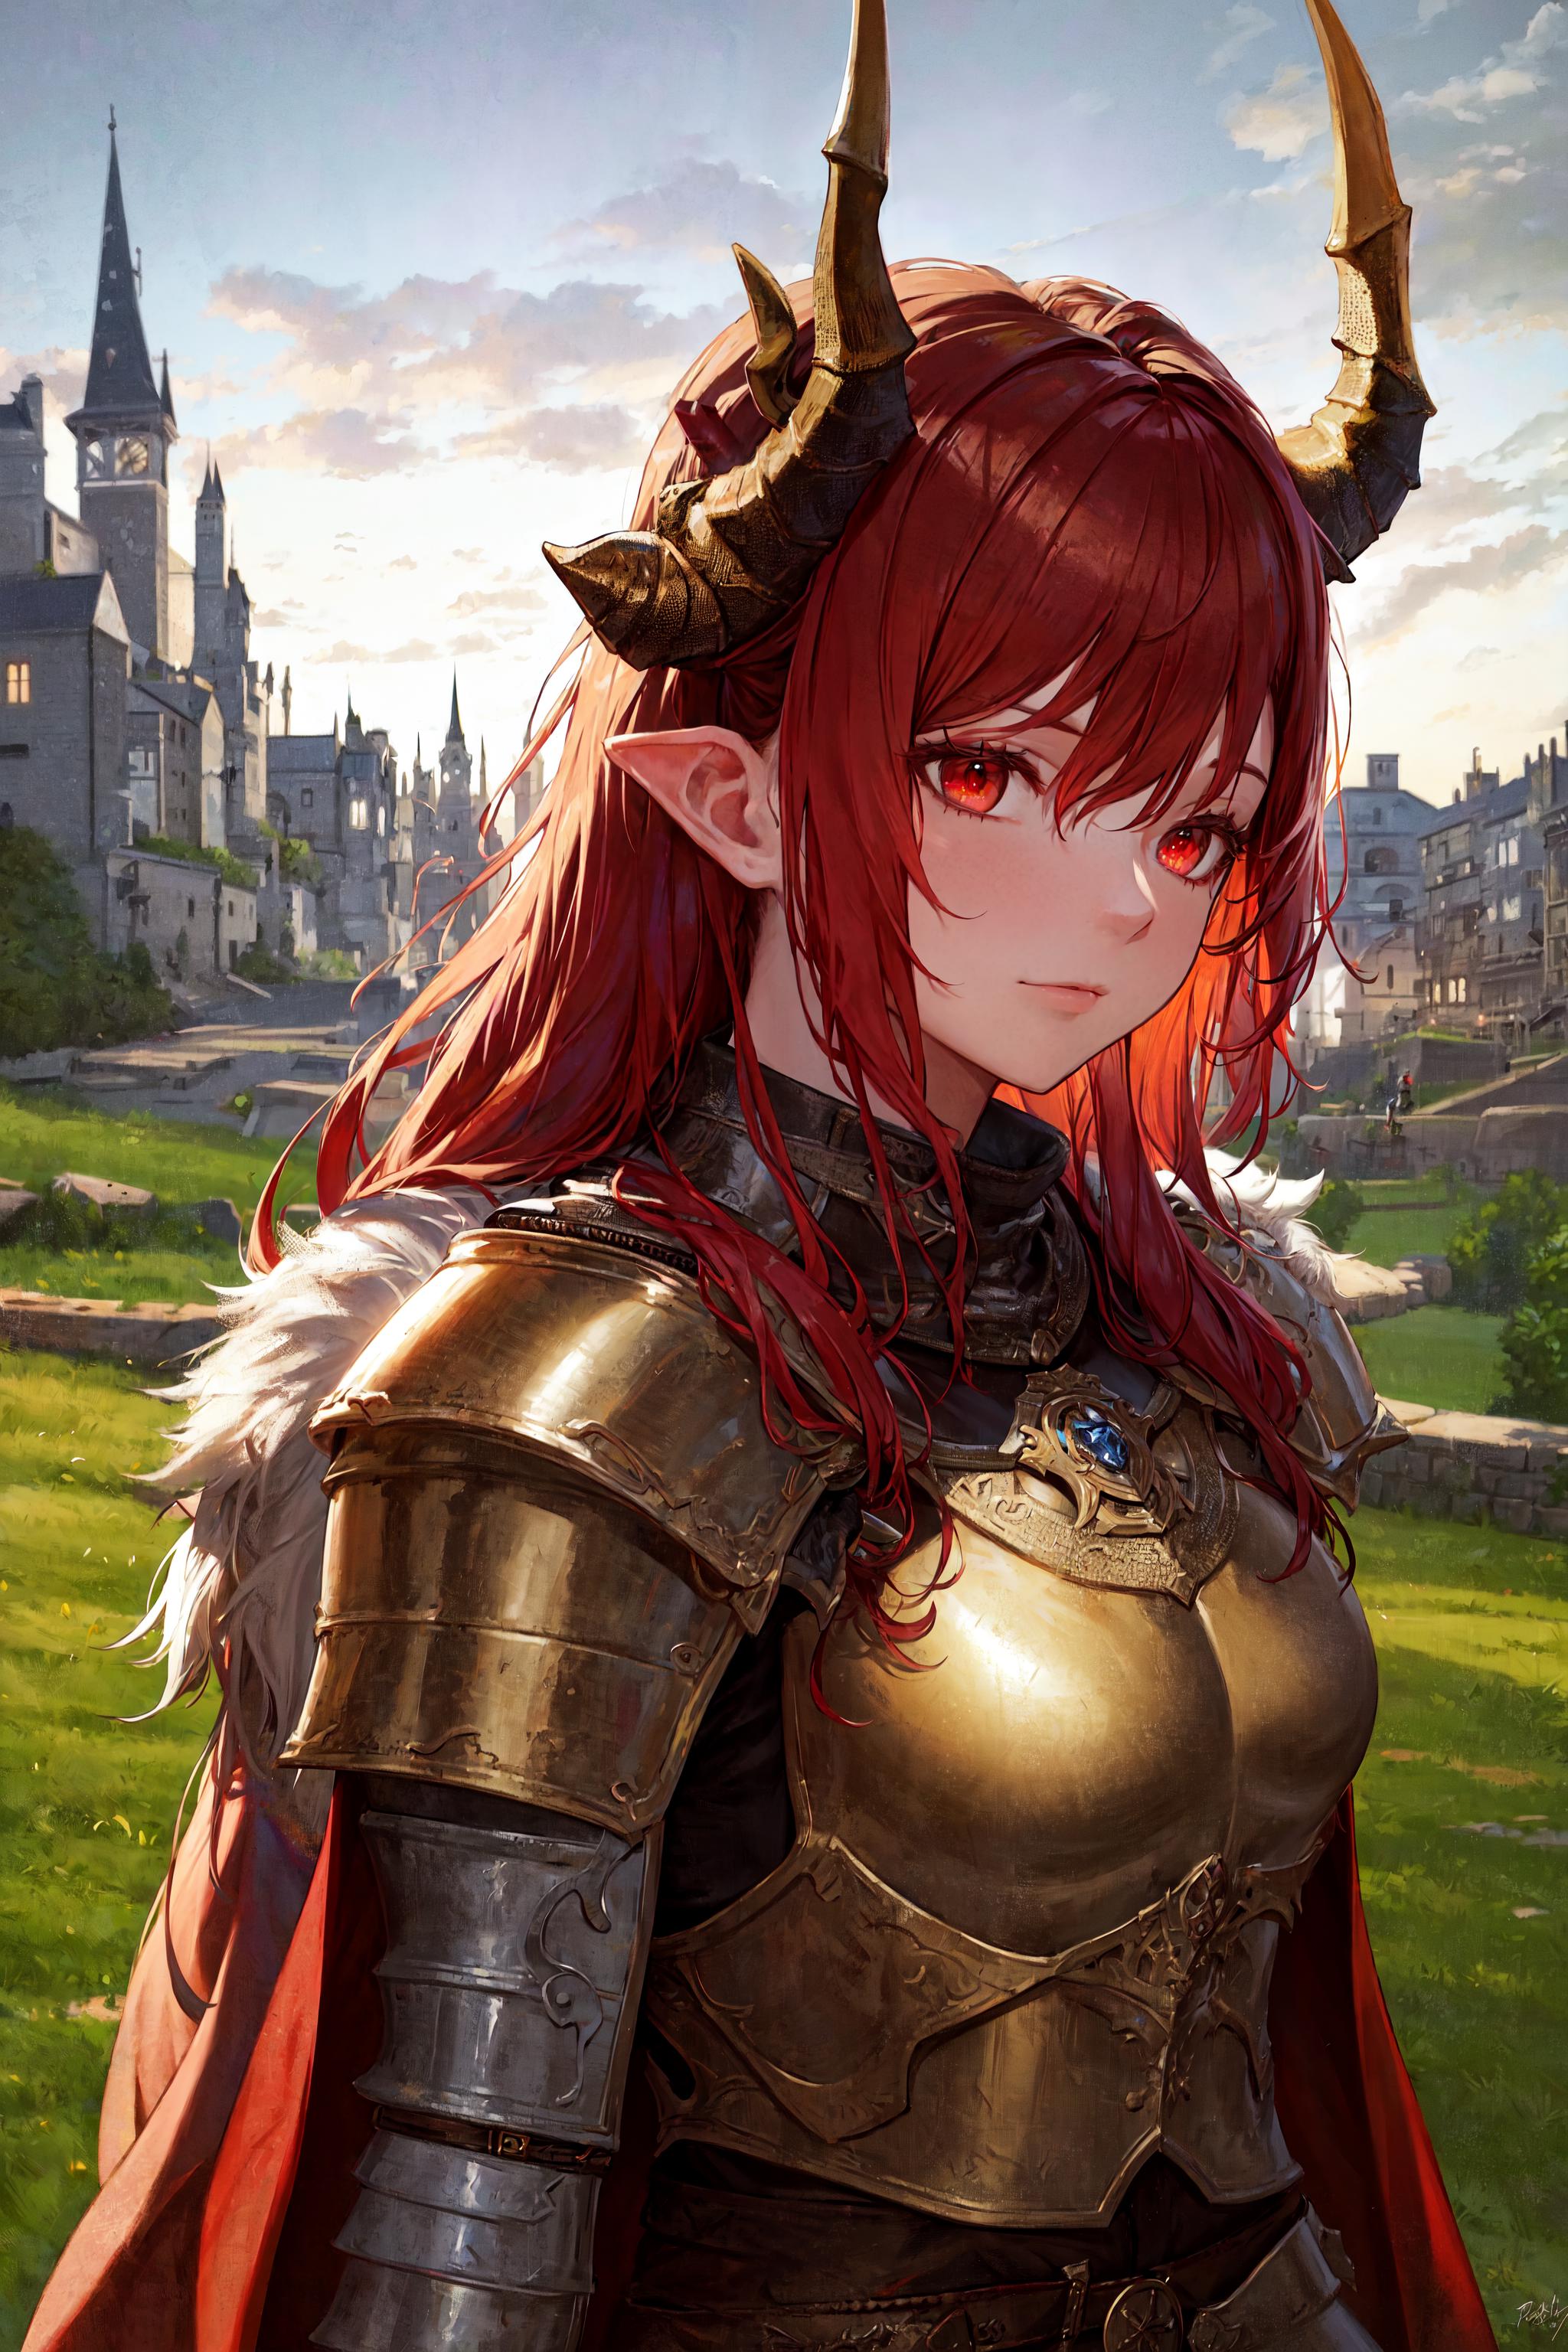 A woman in a gold armor with horns on her head and red hair.